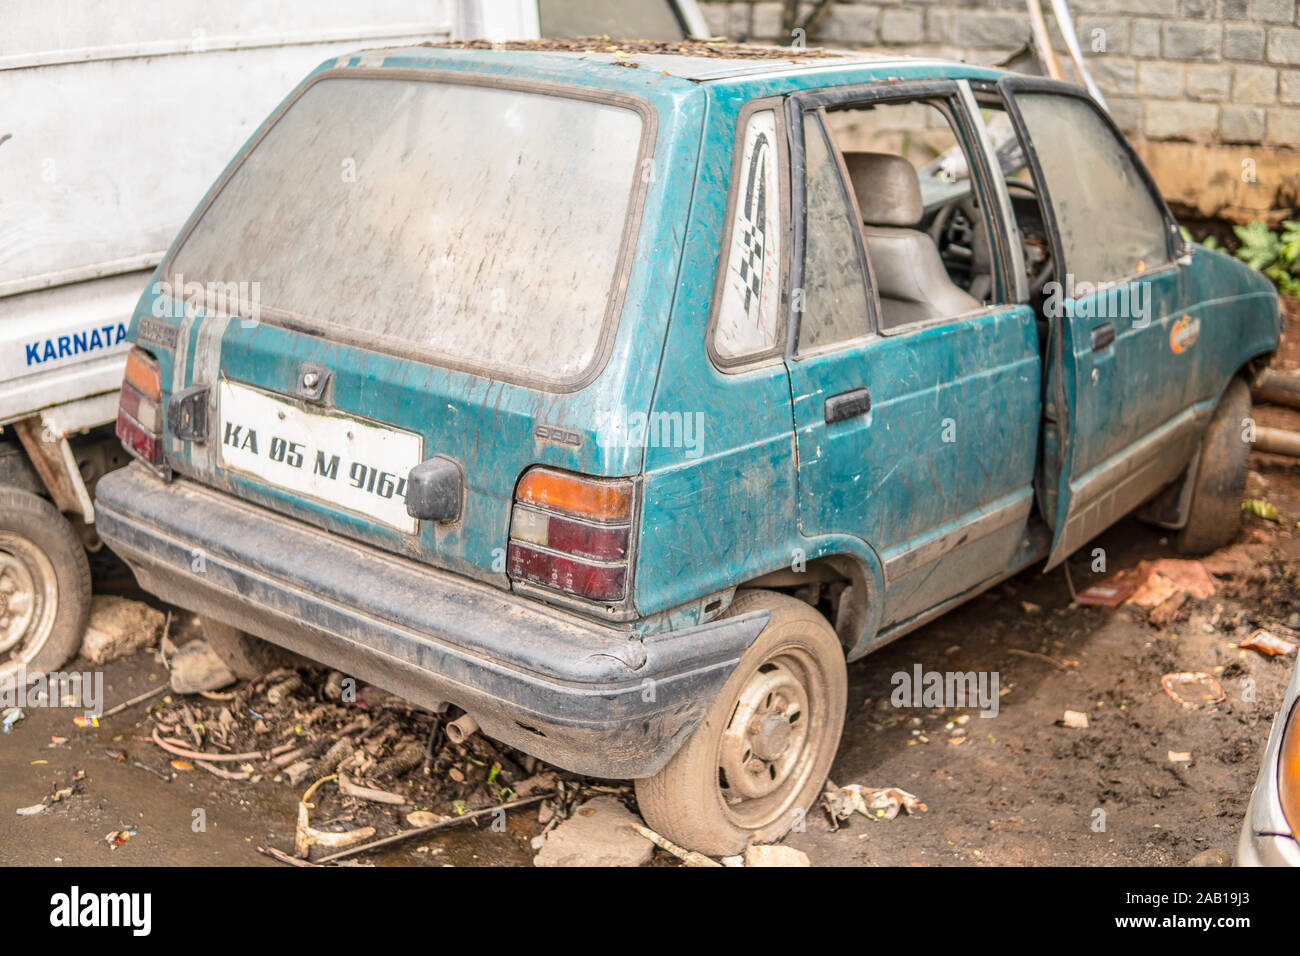 Bangalore, India, June 2018, streets of Bengaluru city, old destroyed and abandoned cars, dusty, muddy, incomplete Stock Photo